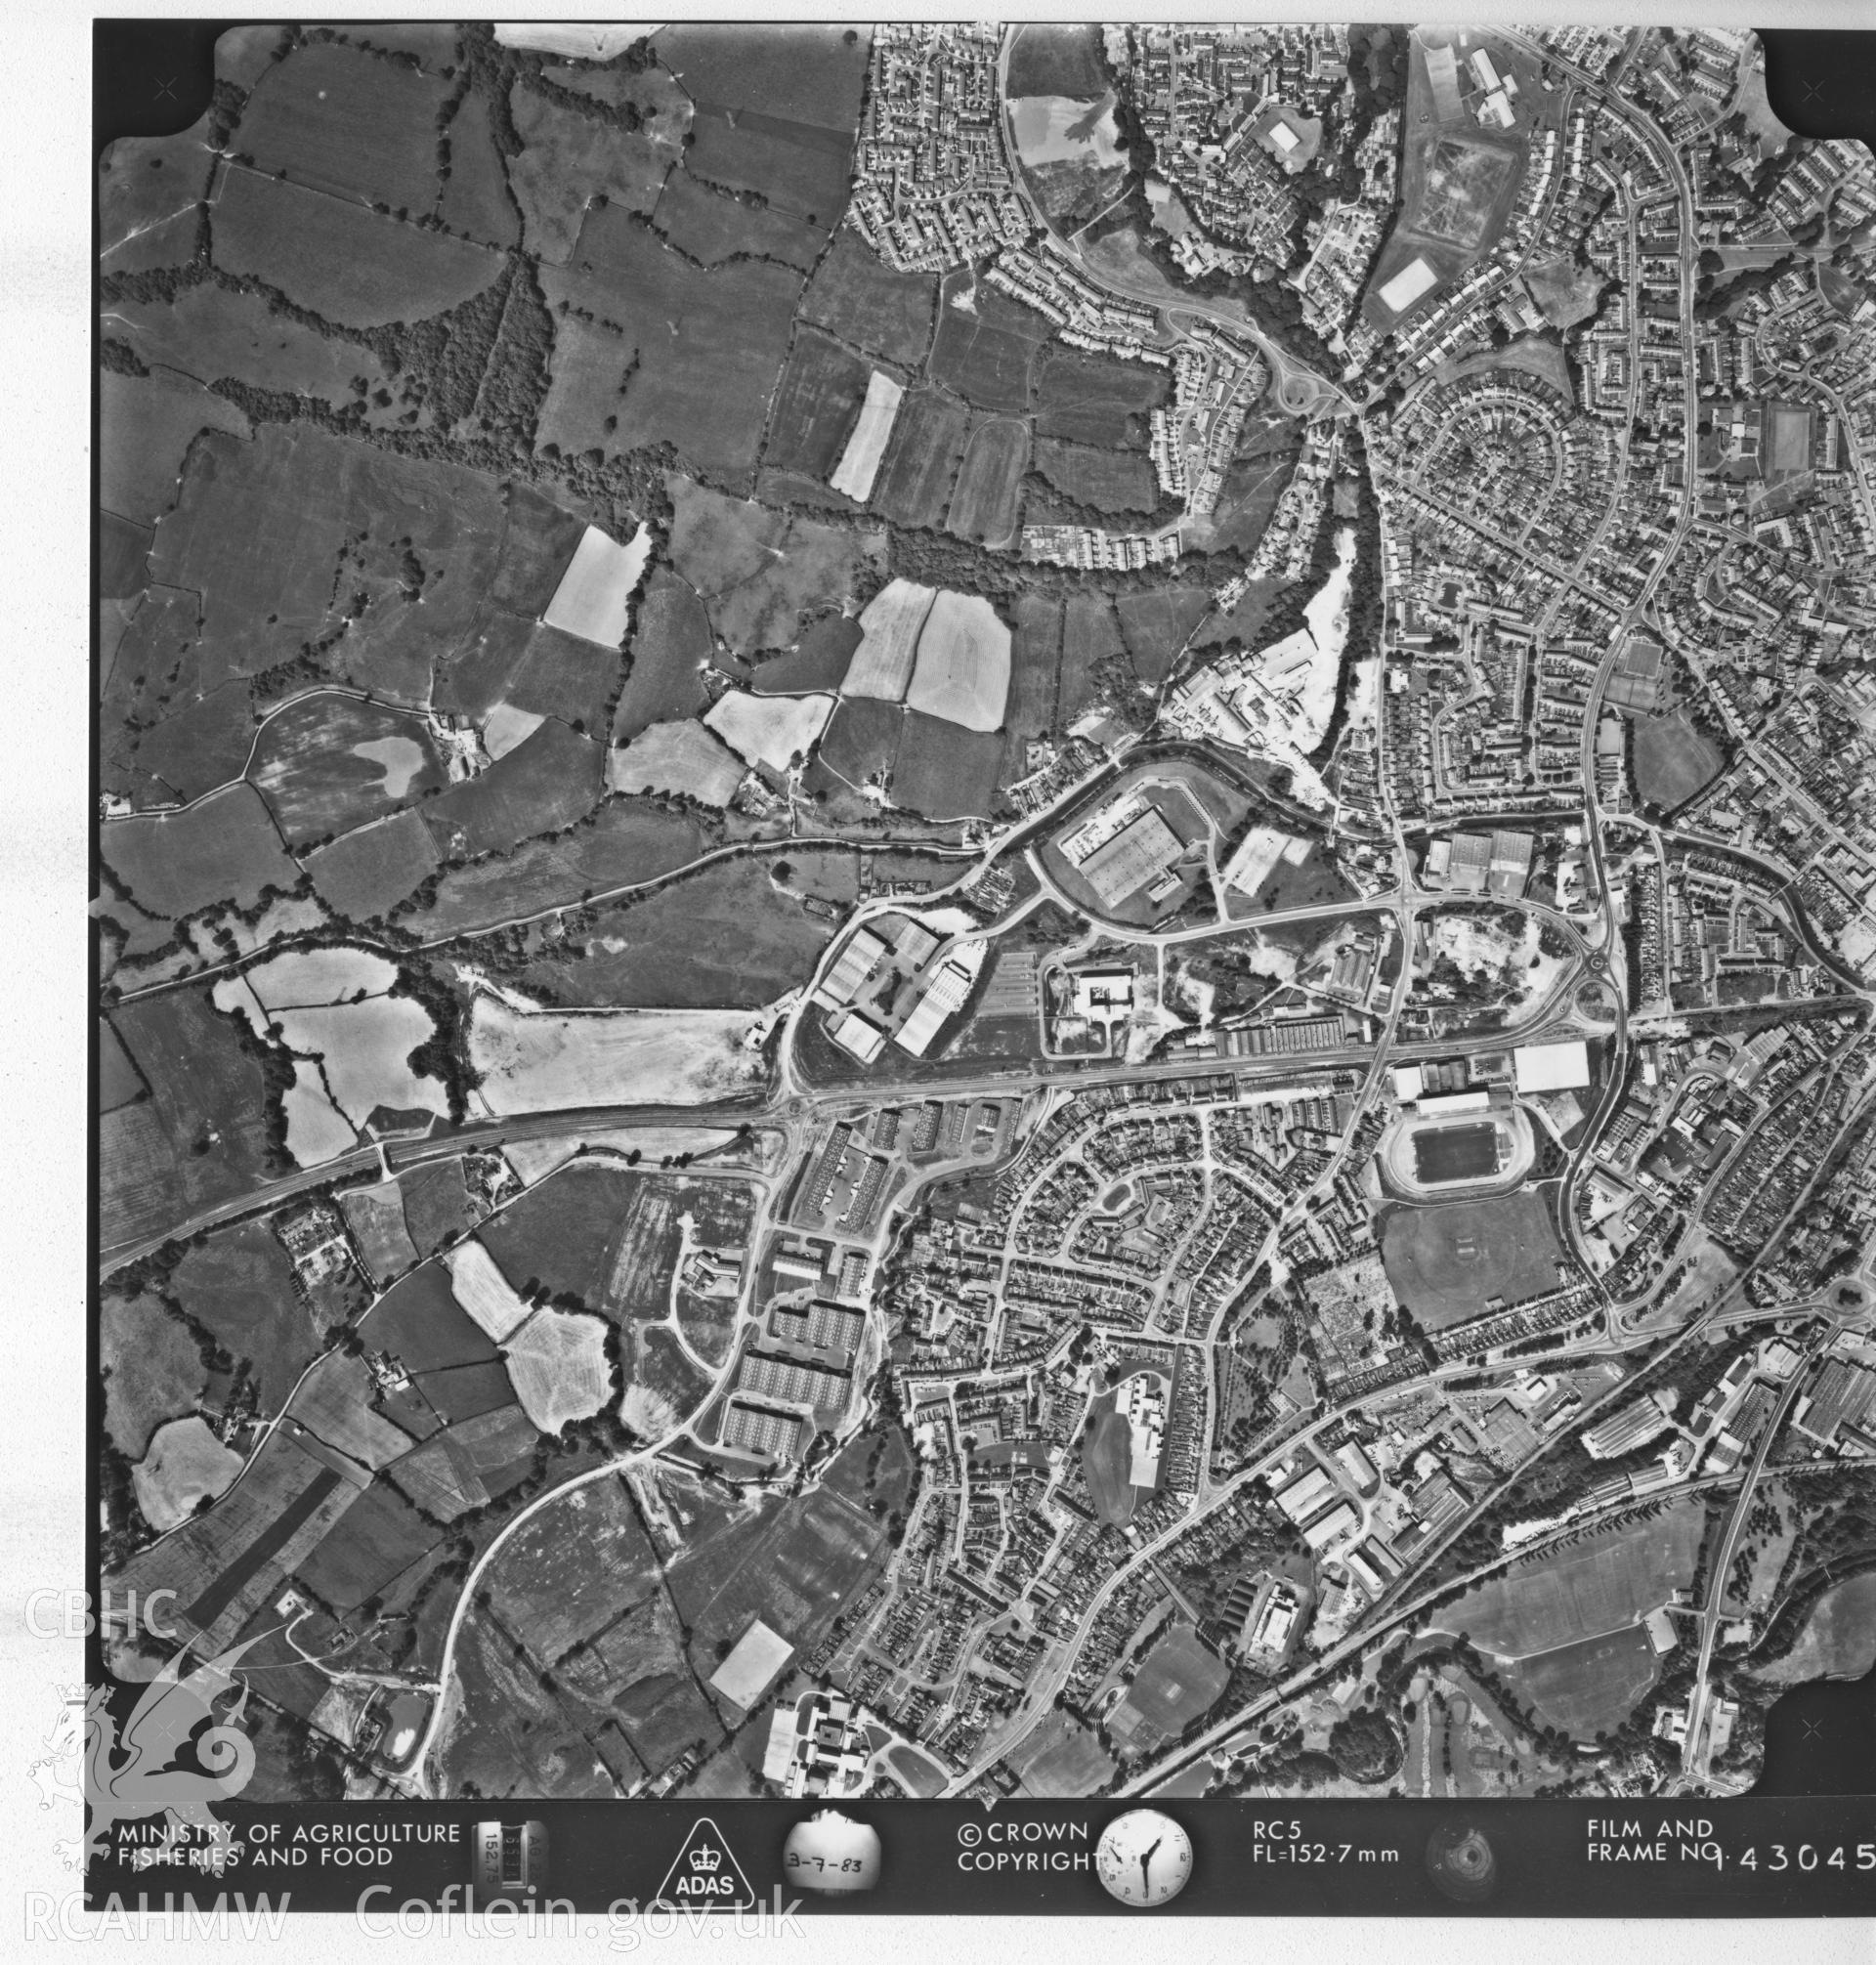 Aerial photograph of Cwmbran, taken in 1983. Included as part of Archaeology Wales' desk based assessment of former Llantarnam Community Primary School, Croeswen, Oakfield, Cwmbran, conducted in 2017.